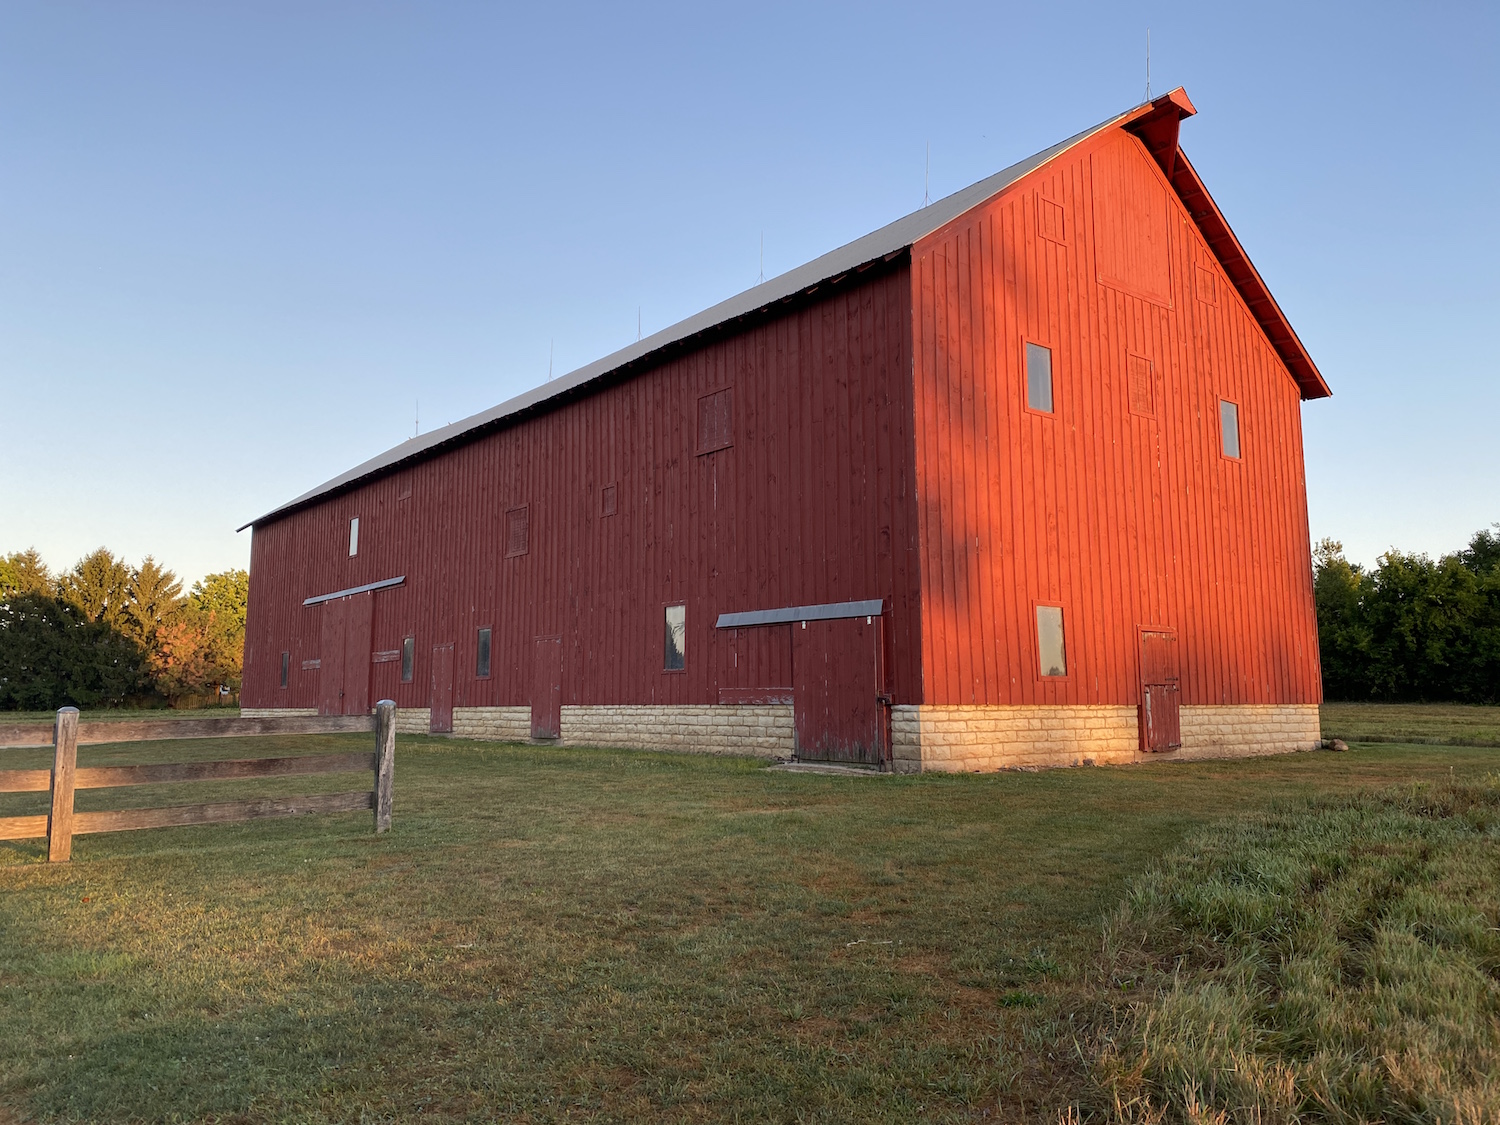 A large red barn in the light of the setting sun.